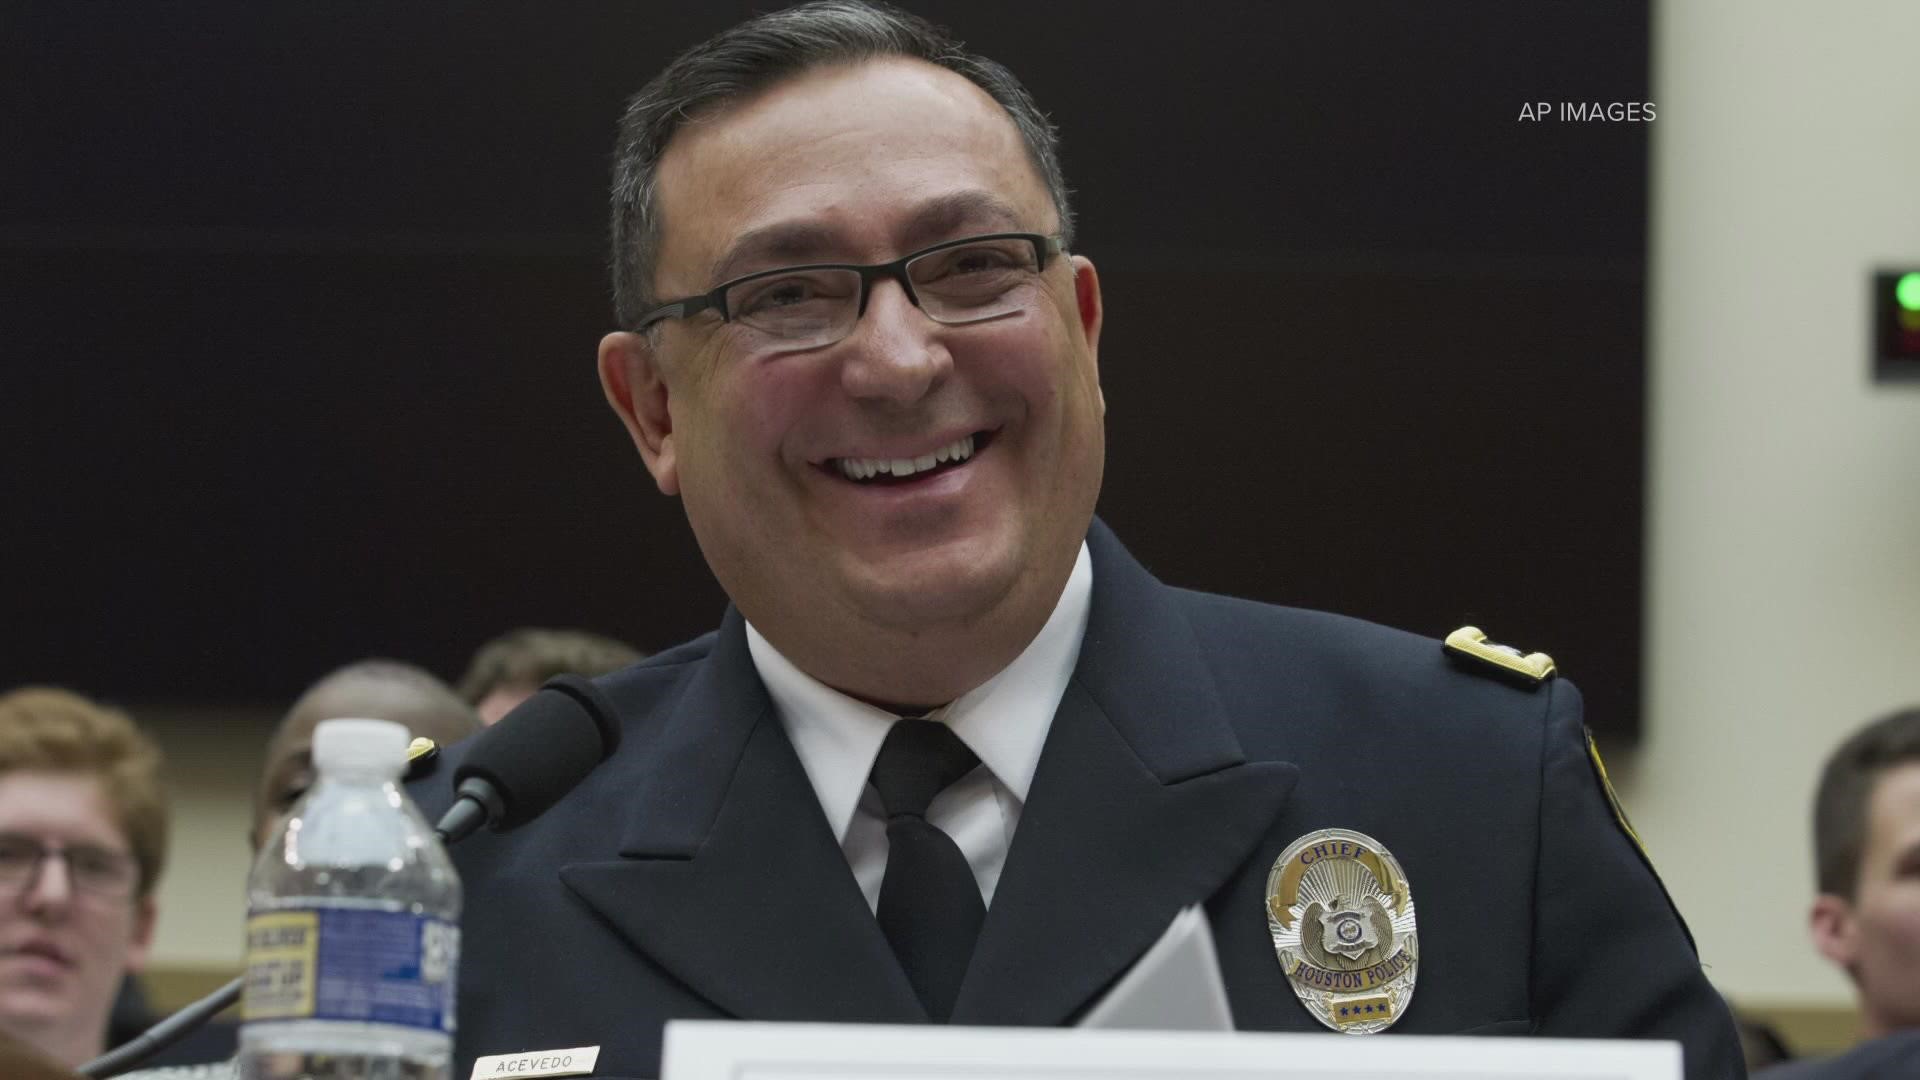 Aurora Police will soon have a new interim chief. The city announced Art Acevedo will take over as interim chief in early December.